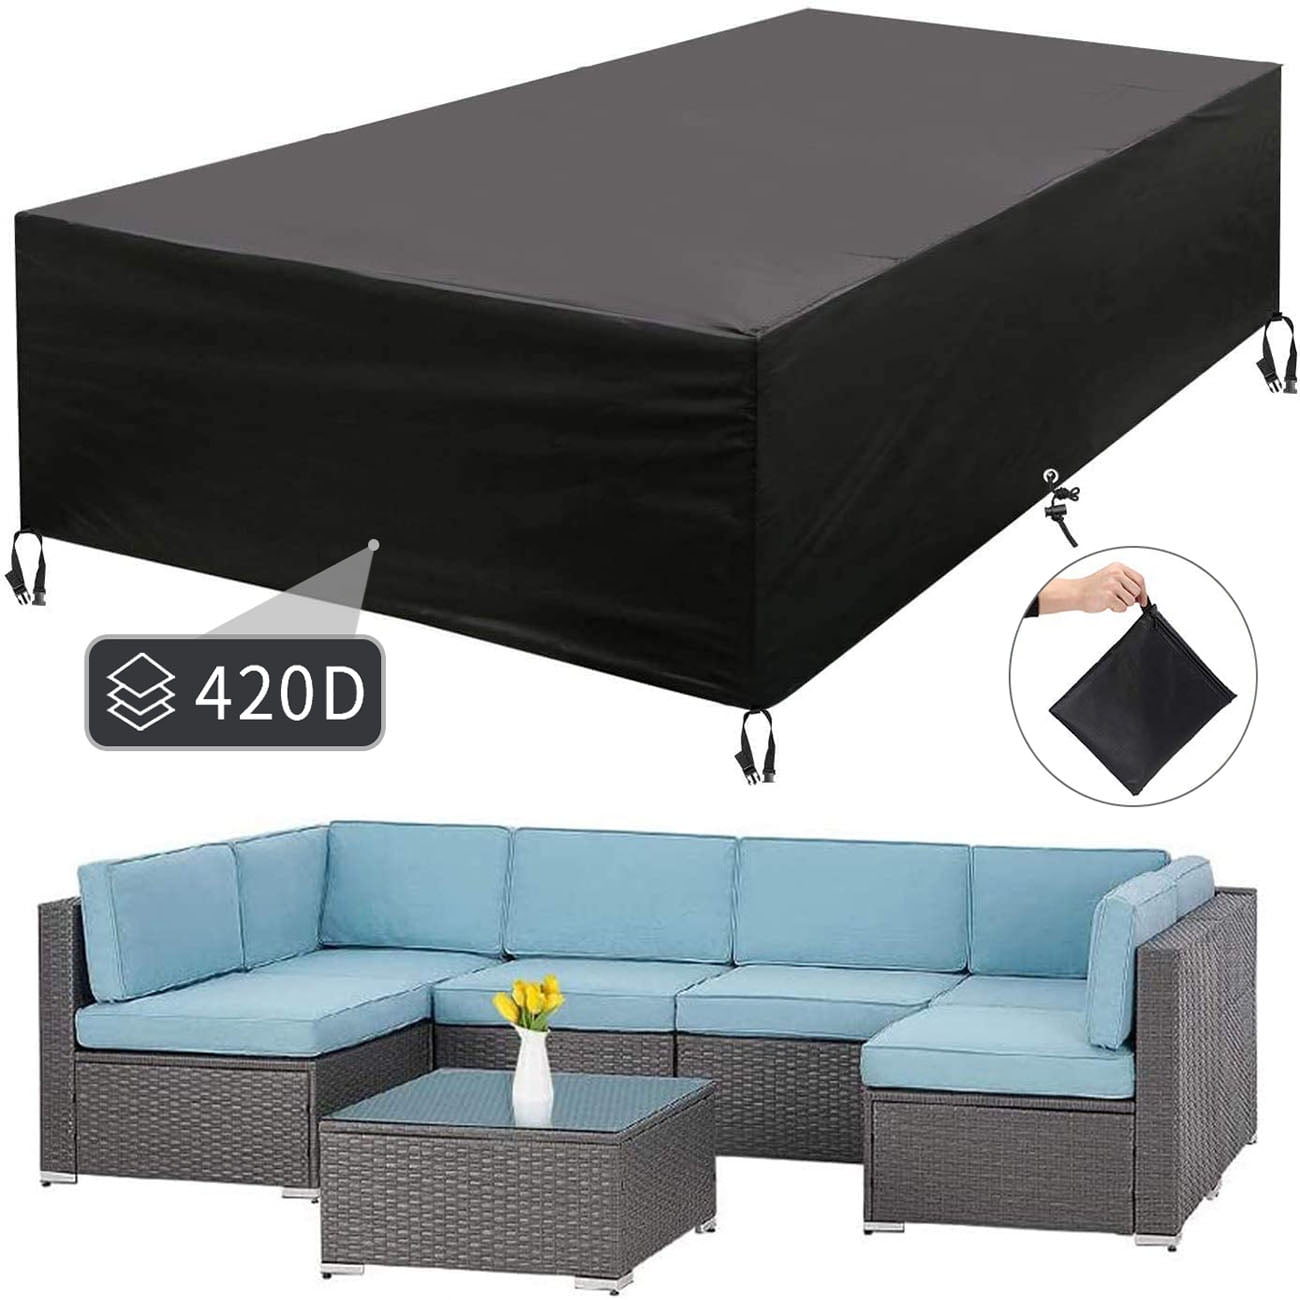 Outdoor Cover  Rain Waterproof Furniture Cover Sofa Protector Dust Covers 16Size 